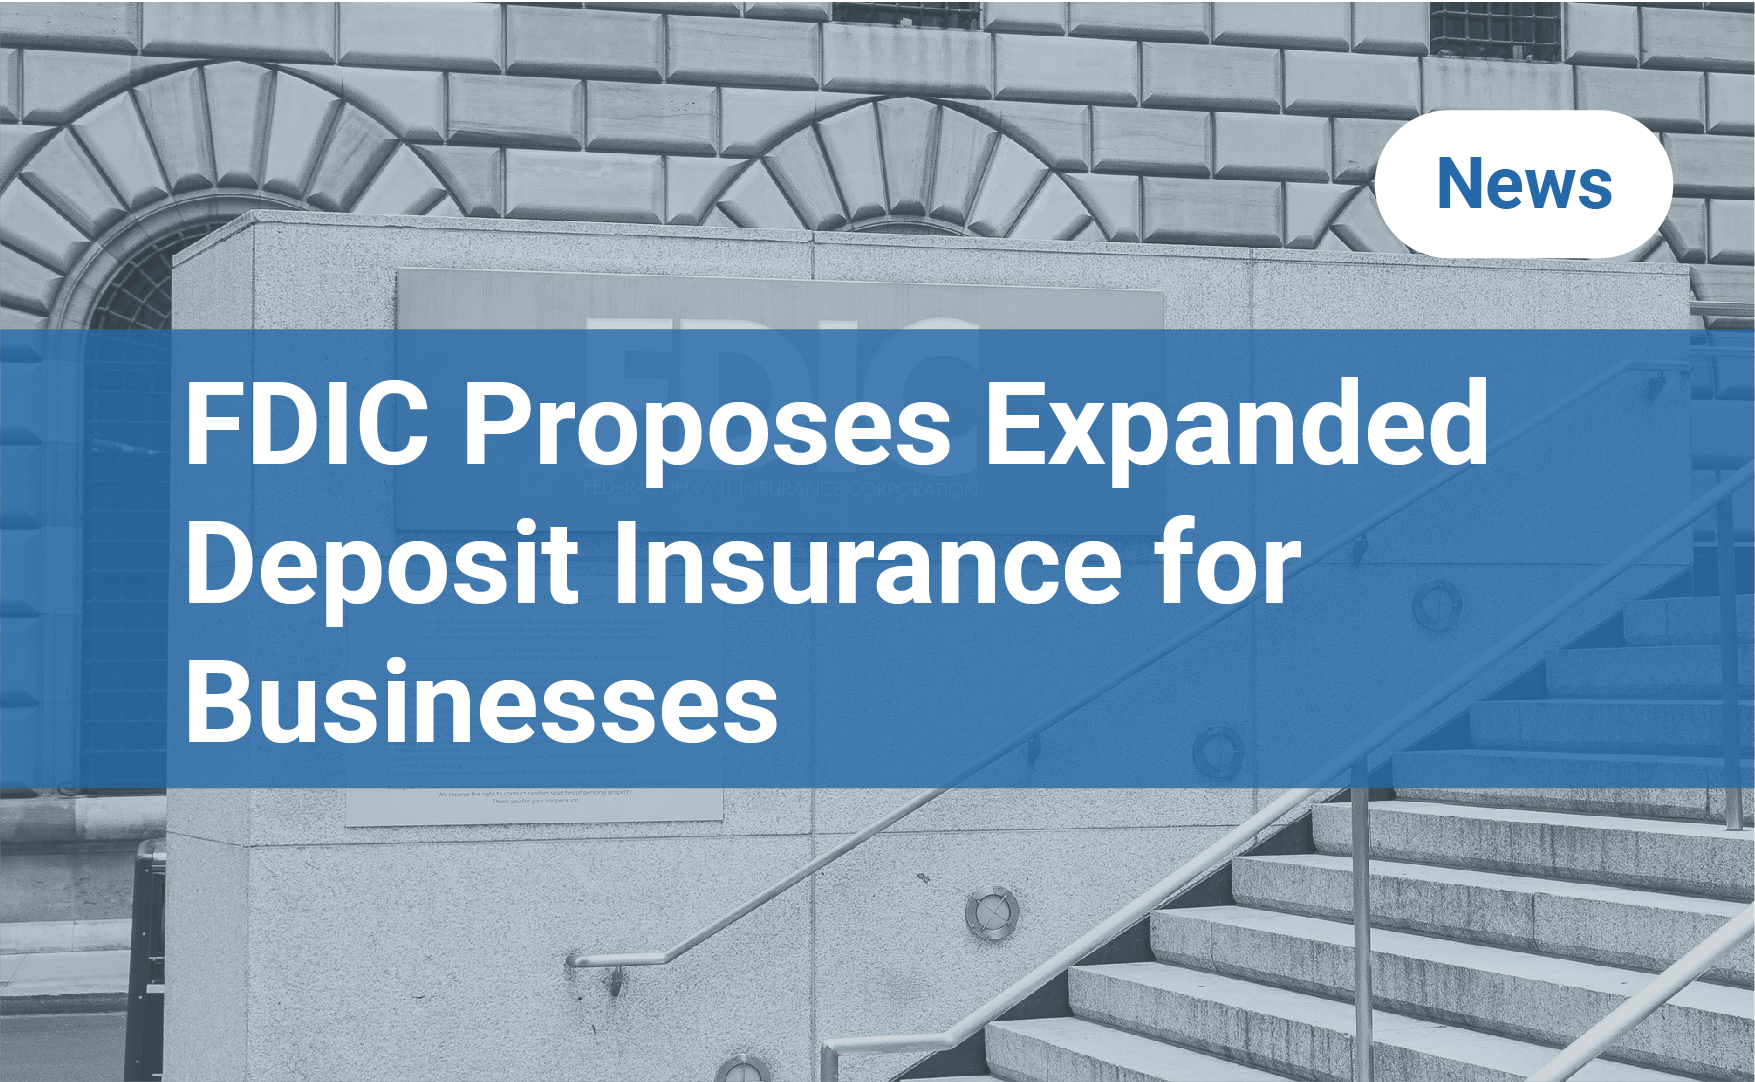 FDIC Proposes Expanded Deposit Insurance for Businesses